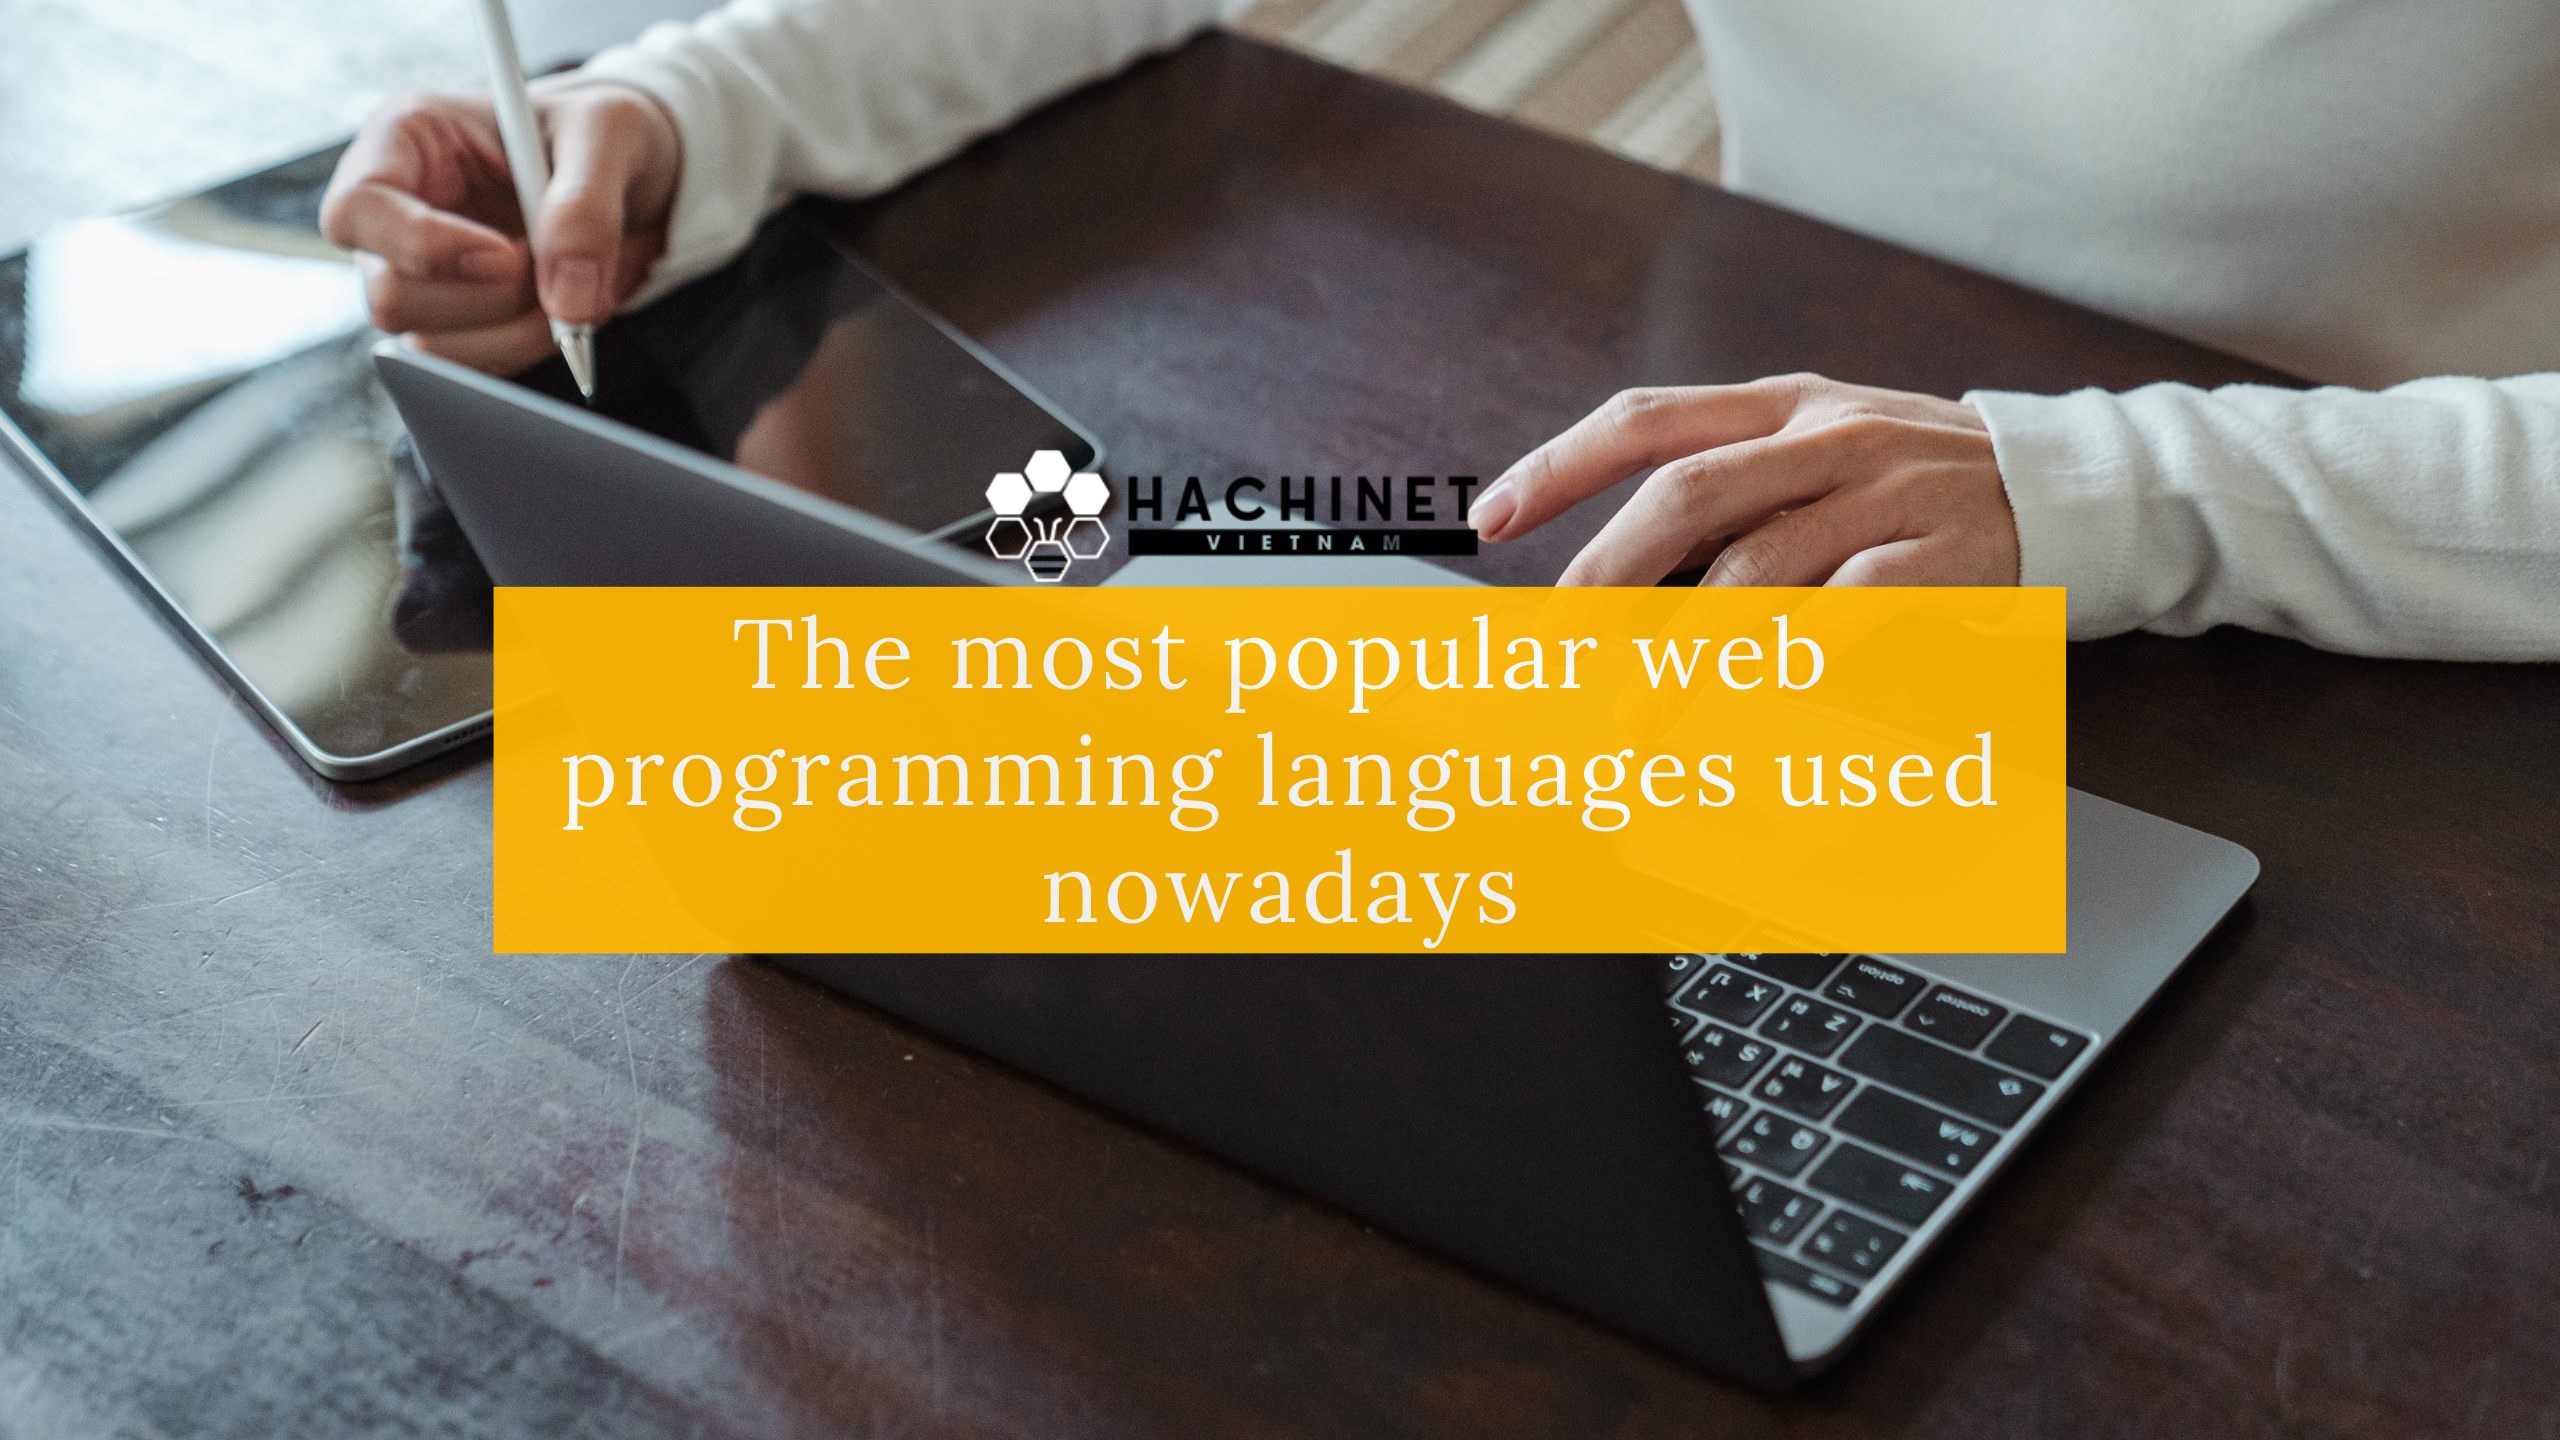 The most popular web programming languages used nowadays